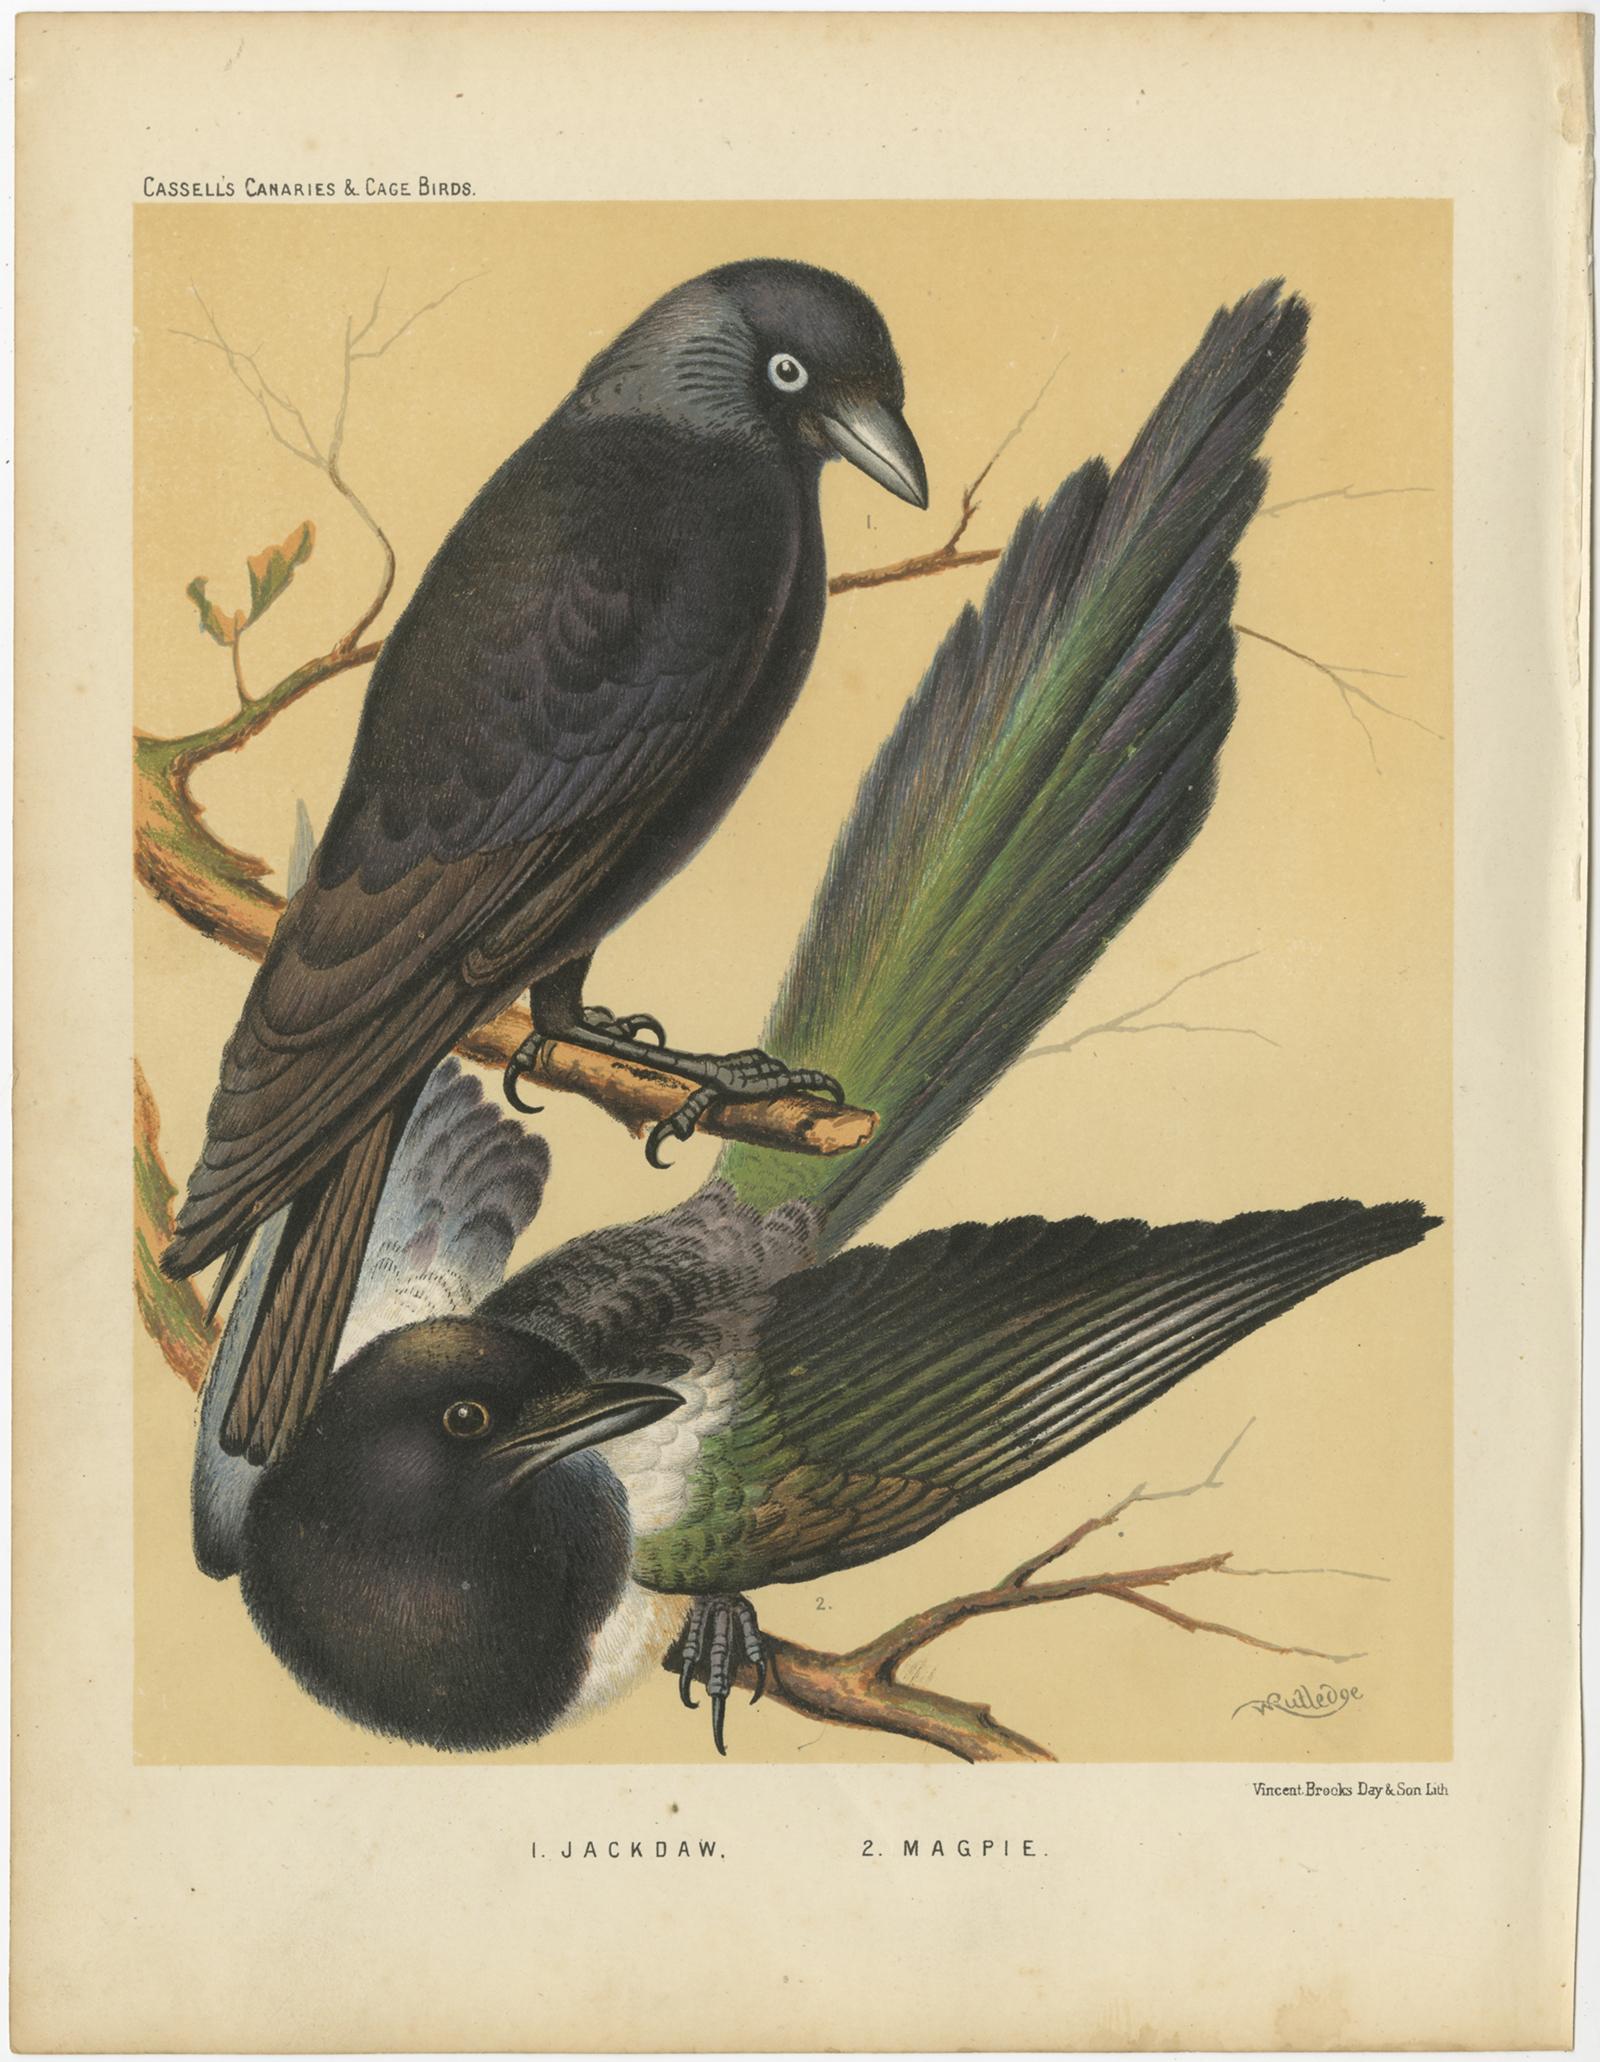 Antique bird print titled '1. Jackdaw 2. Magpie' Old bird print depicting the Jackdaw, Magpie. This print originates from: 'Illustrated book of canaries and cage-birds' by W. A. Blackston, W. Swaysland and August F. Wiener F.Z.S. Published by Cassel